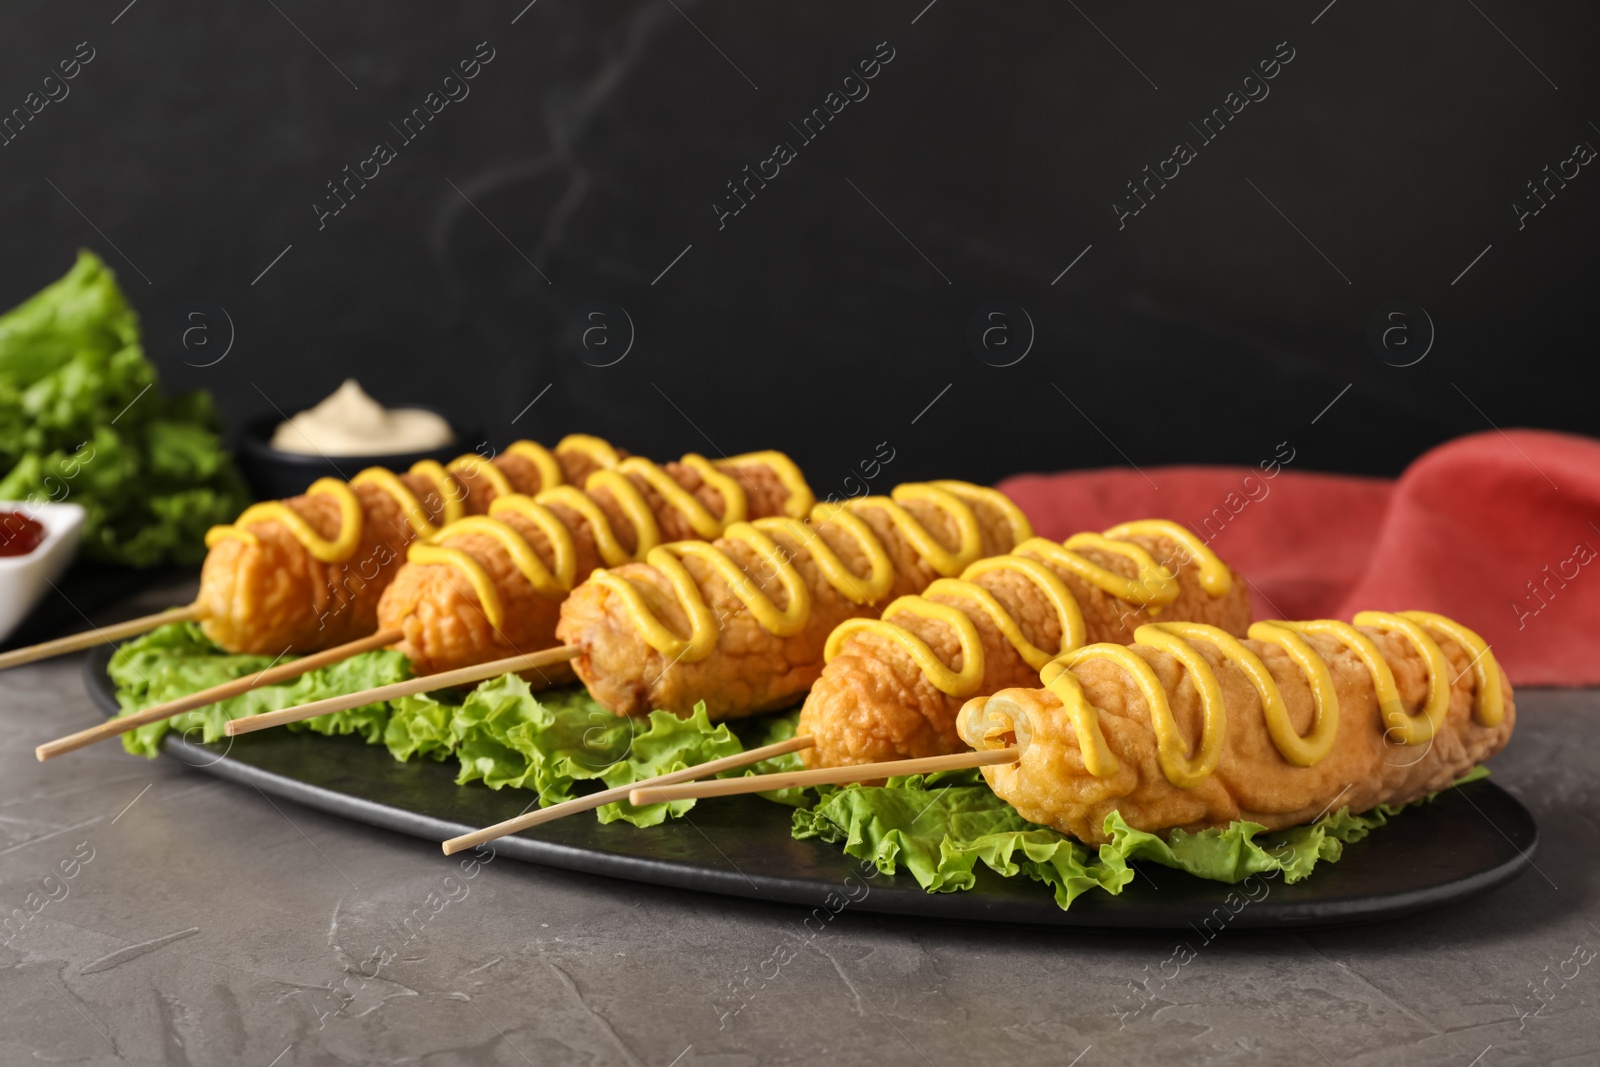 Photo of Delicious corn dogs with mustard served on grey table